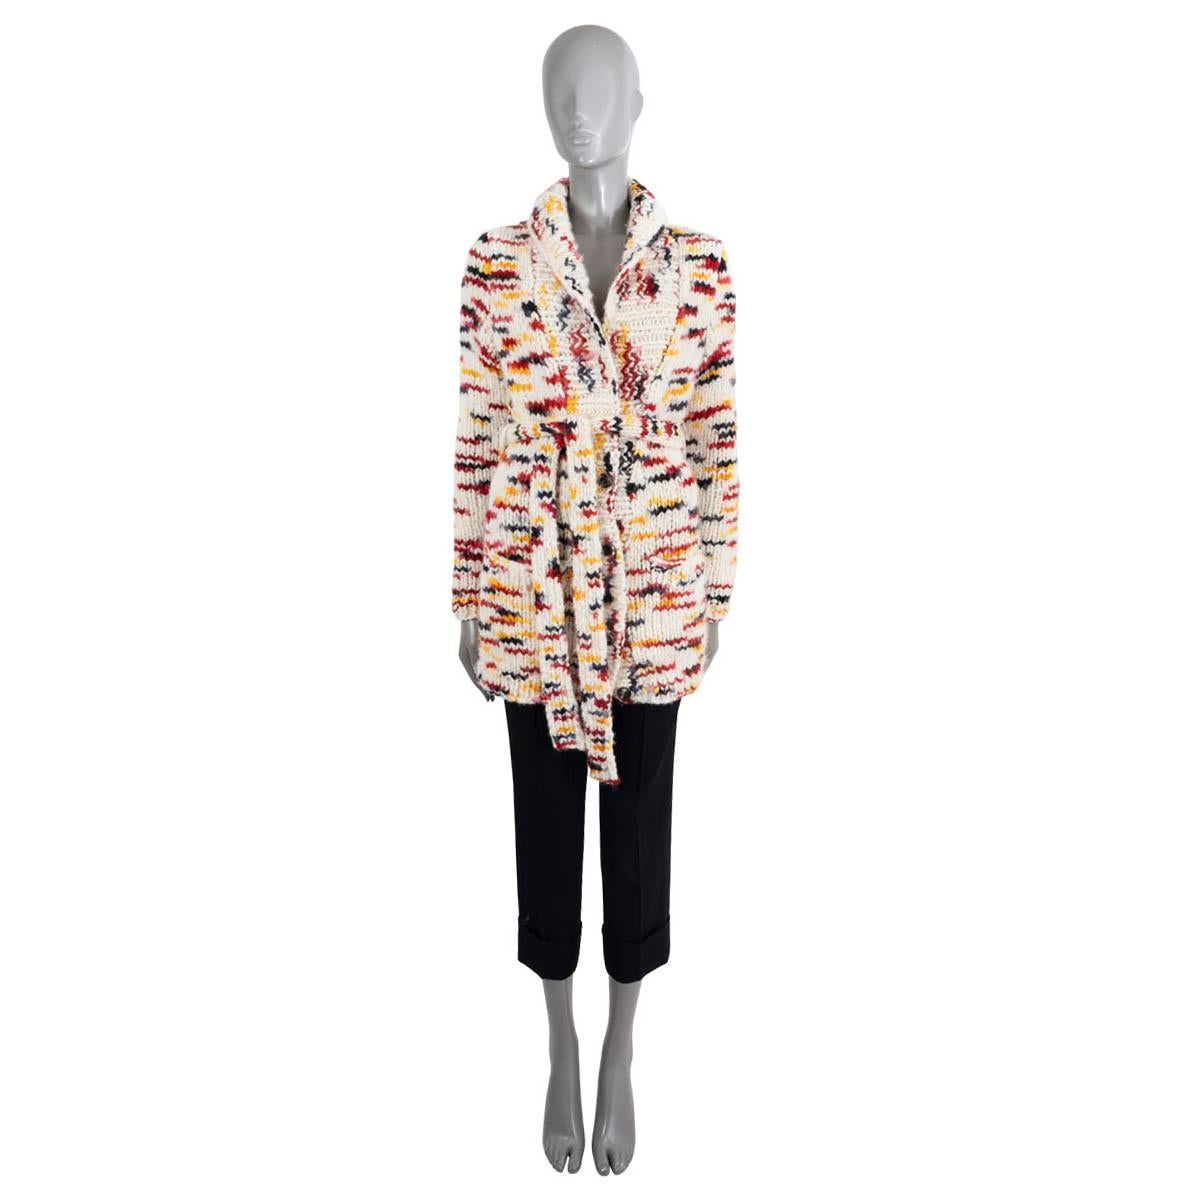 100% authentic Gabriela Hearst Hopkins knit jacket in space-dyed ivory brushed cashmere (100%) with details in ivory, red, yellow and black. Features shawl collar, matching knit belt, rib-knit trims and patch pockets at the waist. Closes with